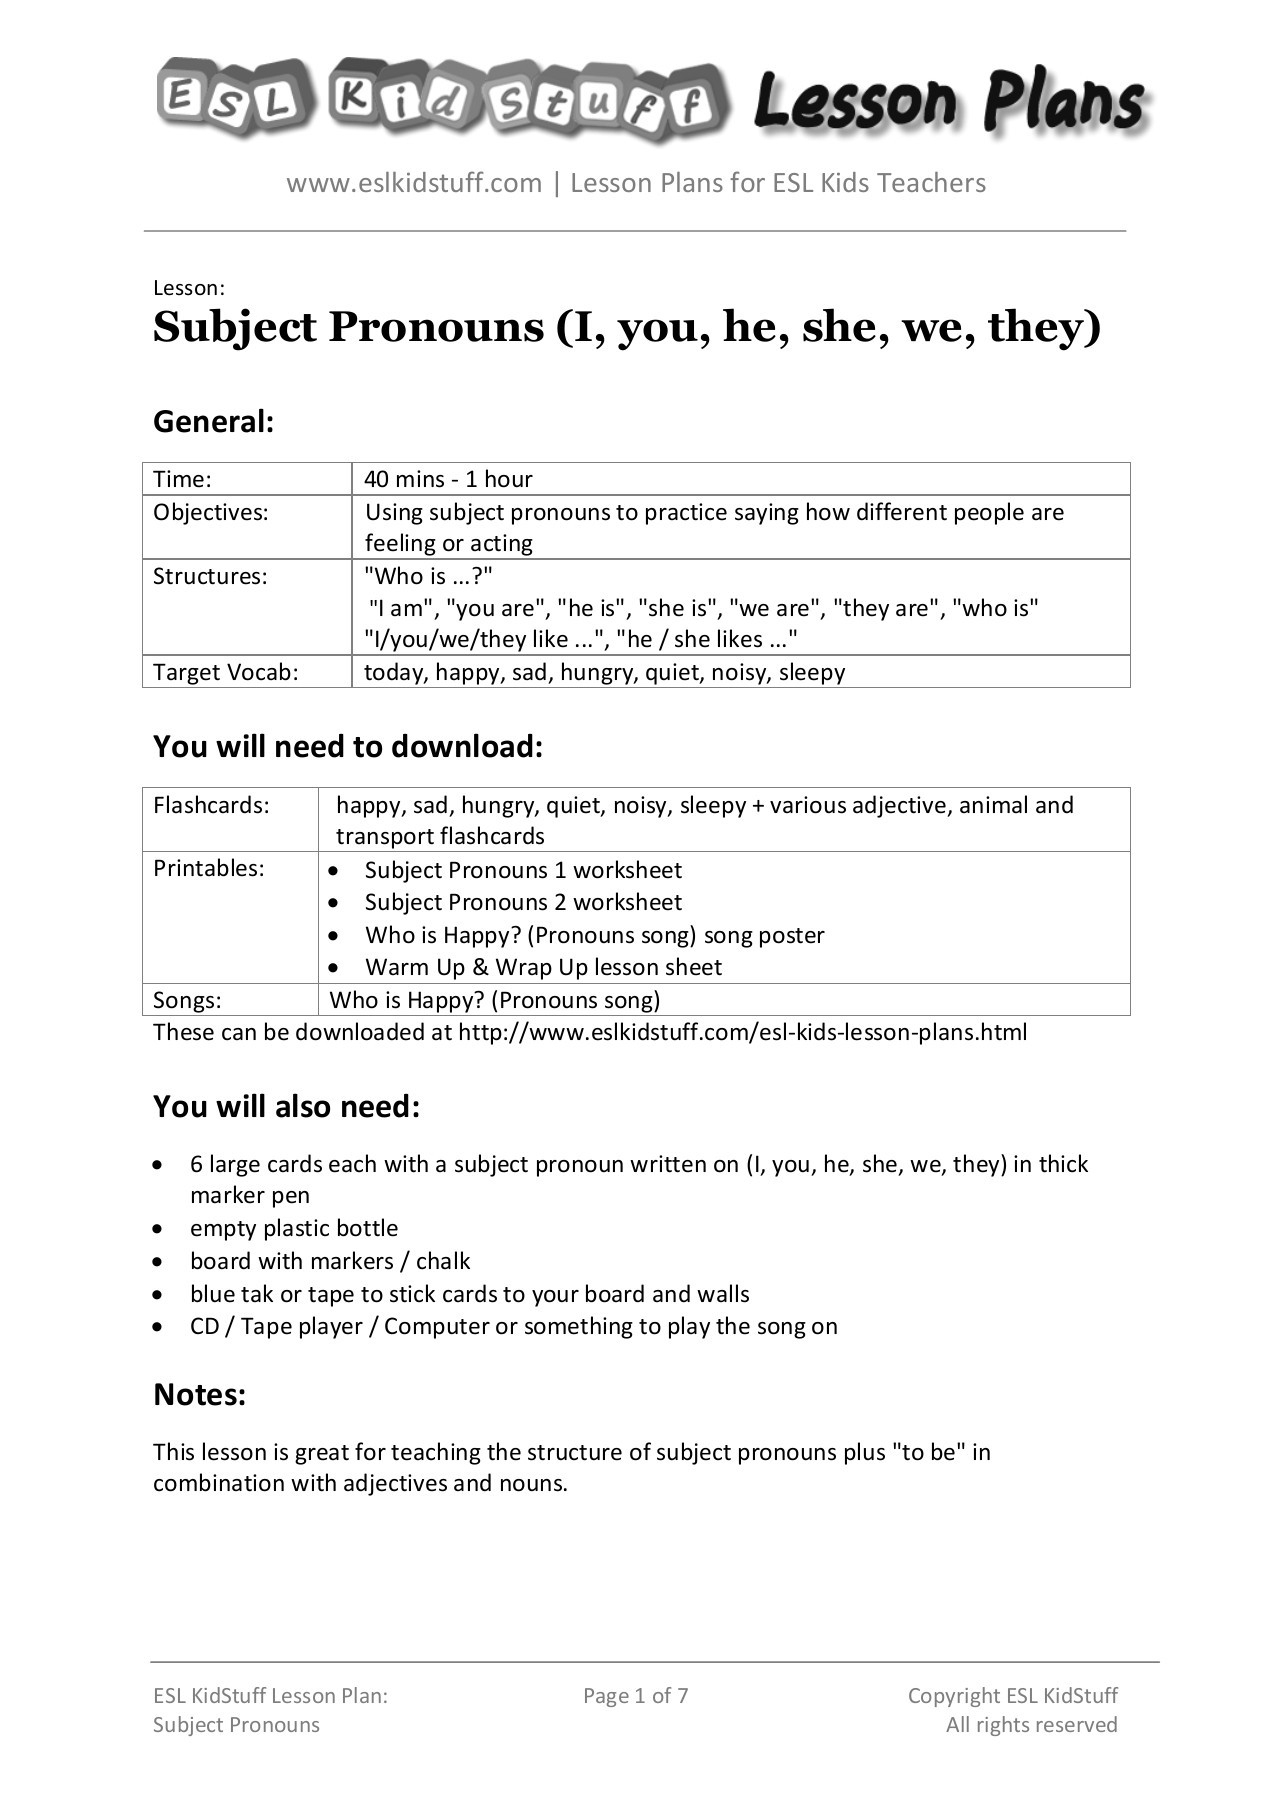 Lesson: Subject Pronouns (I, You, He, She, We, They) Pages 1